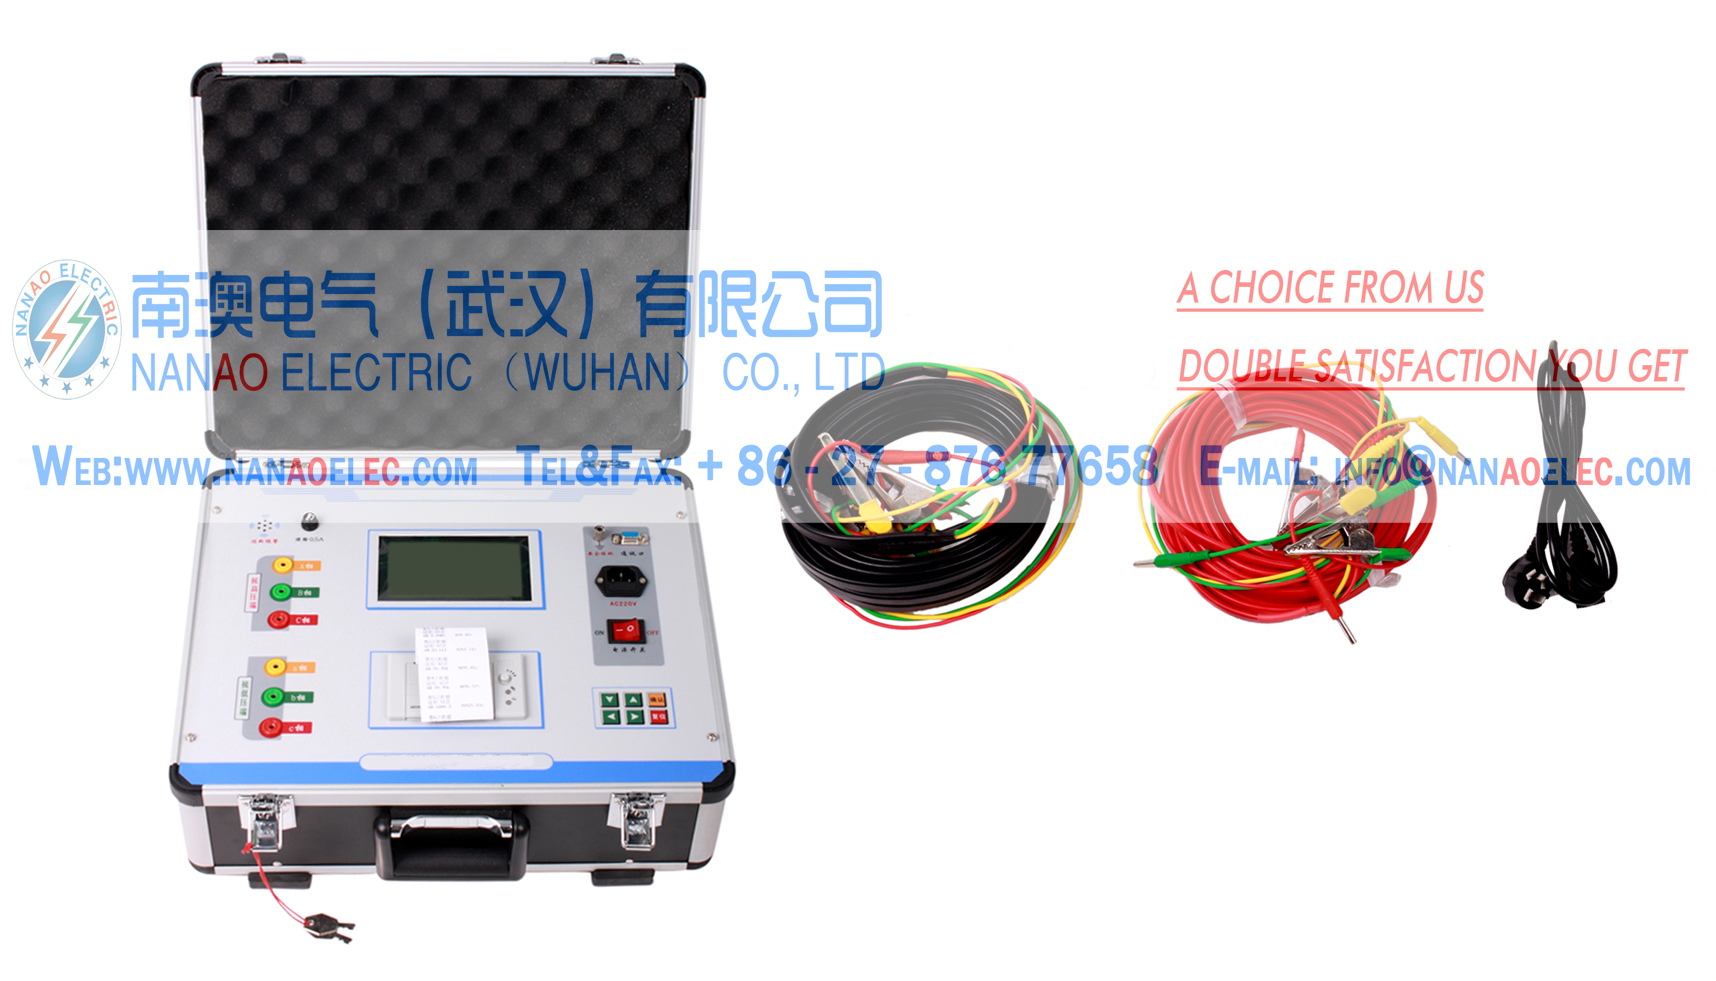 NABZ Automatic Variable Ratio Group Tester,Transformer ratio group tester, transformer ratio tester, transformer ratio automatic tester, automatic transformer ratio tester, transformer ratio group testing device, transformer ratio testing device